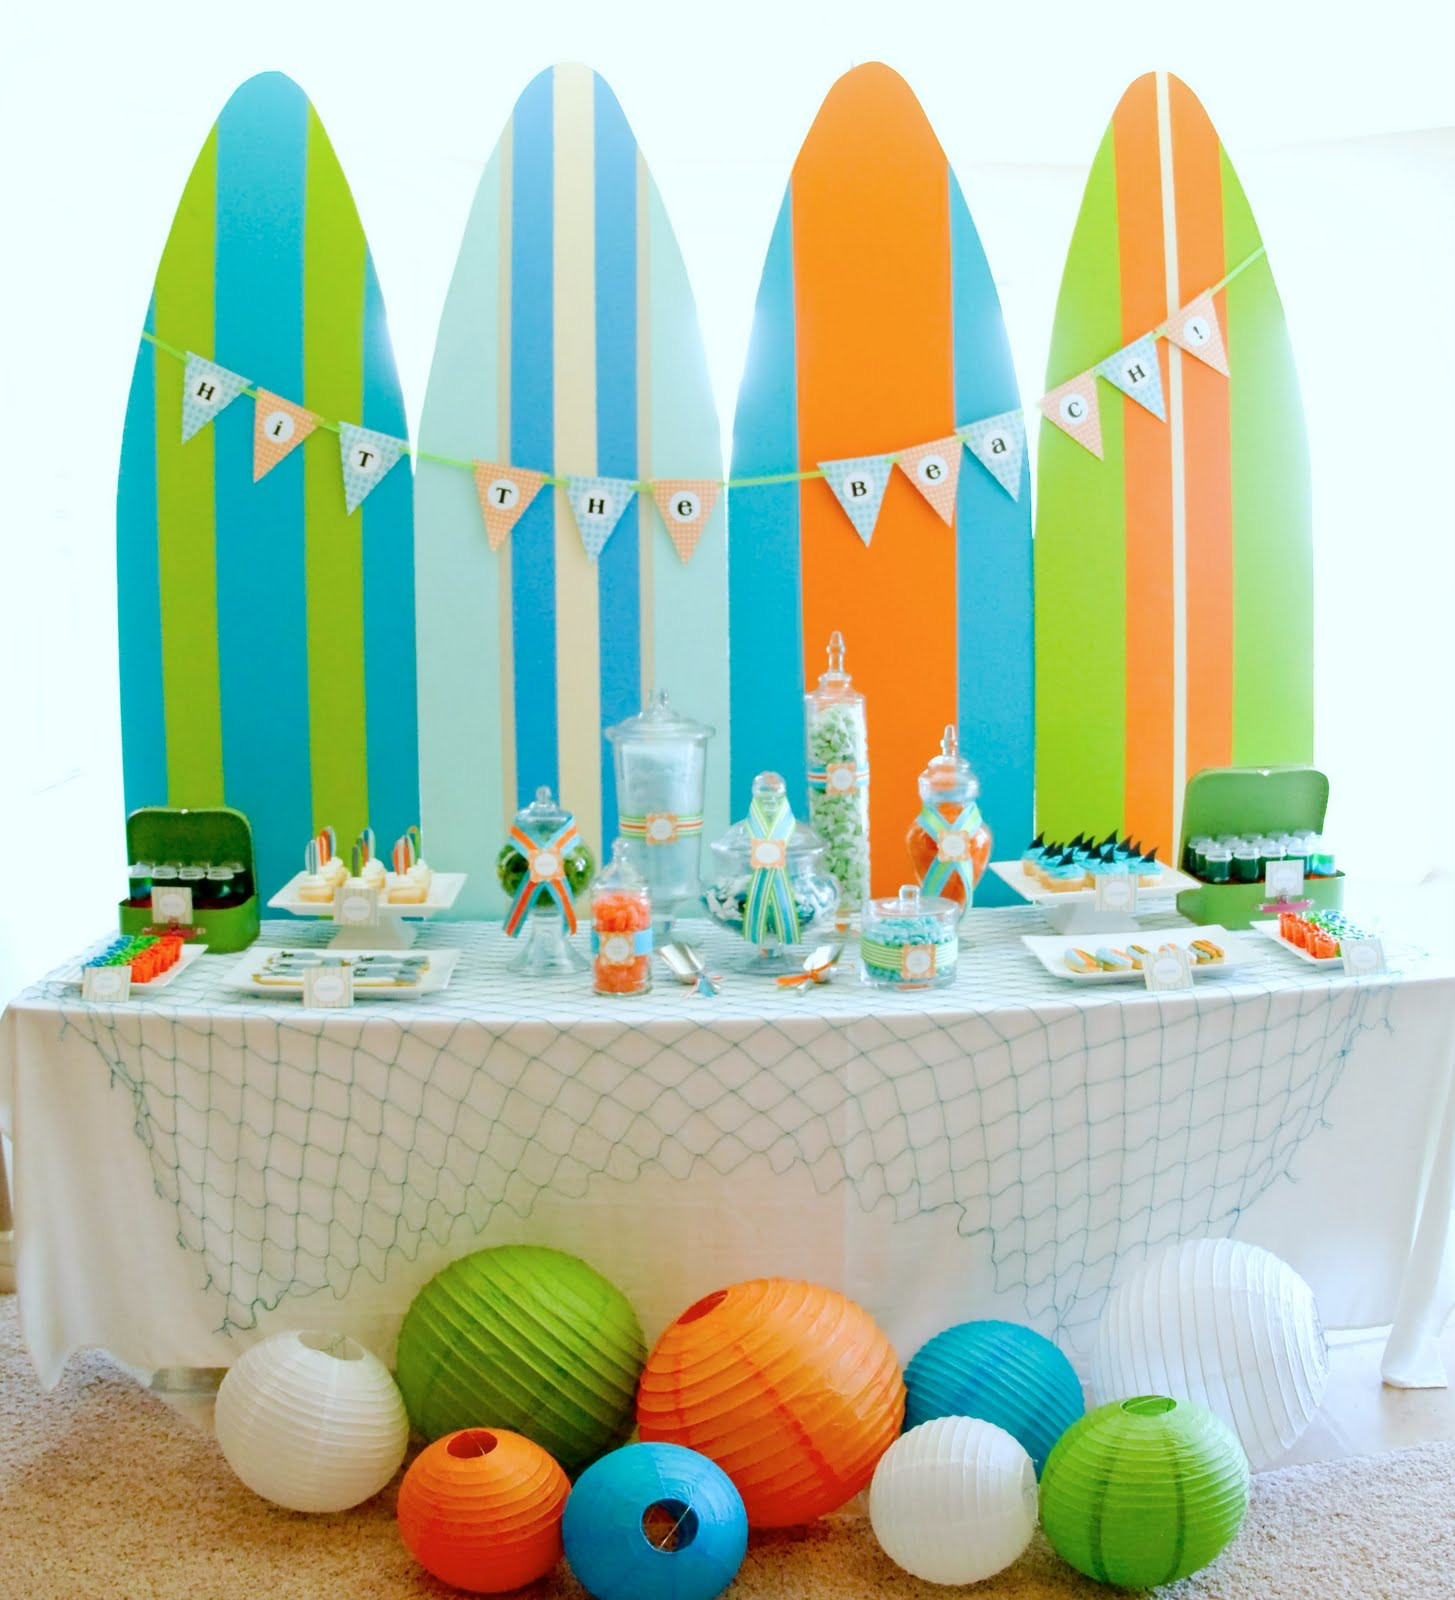 Summer Party Decoration Ideas
 Kara s Party Ideas Surf s Up Summer Pool Party